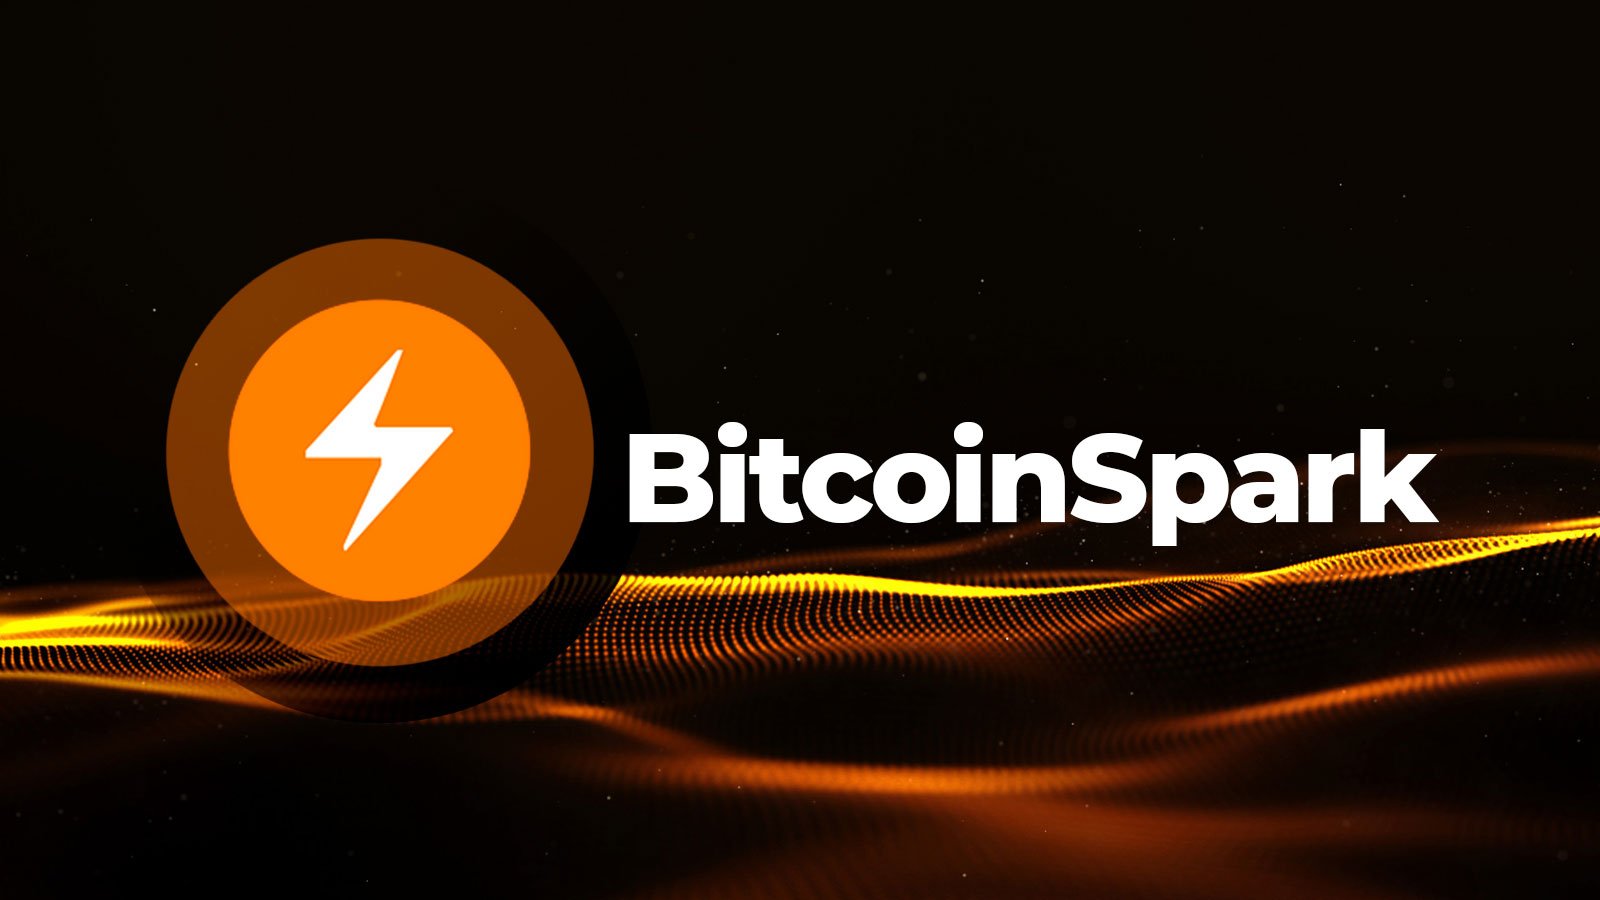 Crypto Exchange Coinbase Receives License in Spain, While Bitcoin Spark (BTCS) ICO On-Boards New Supporters